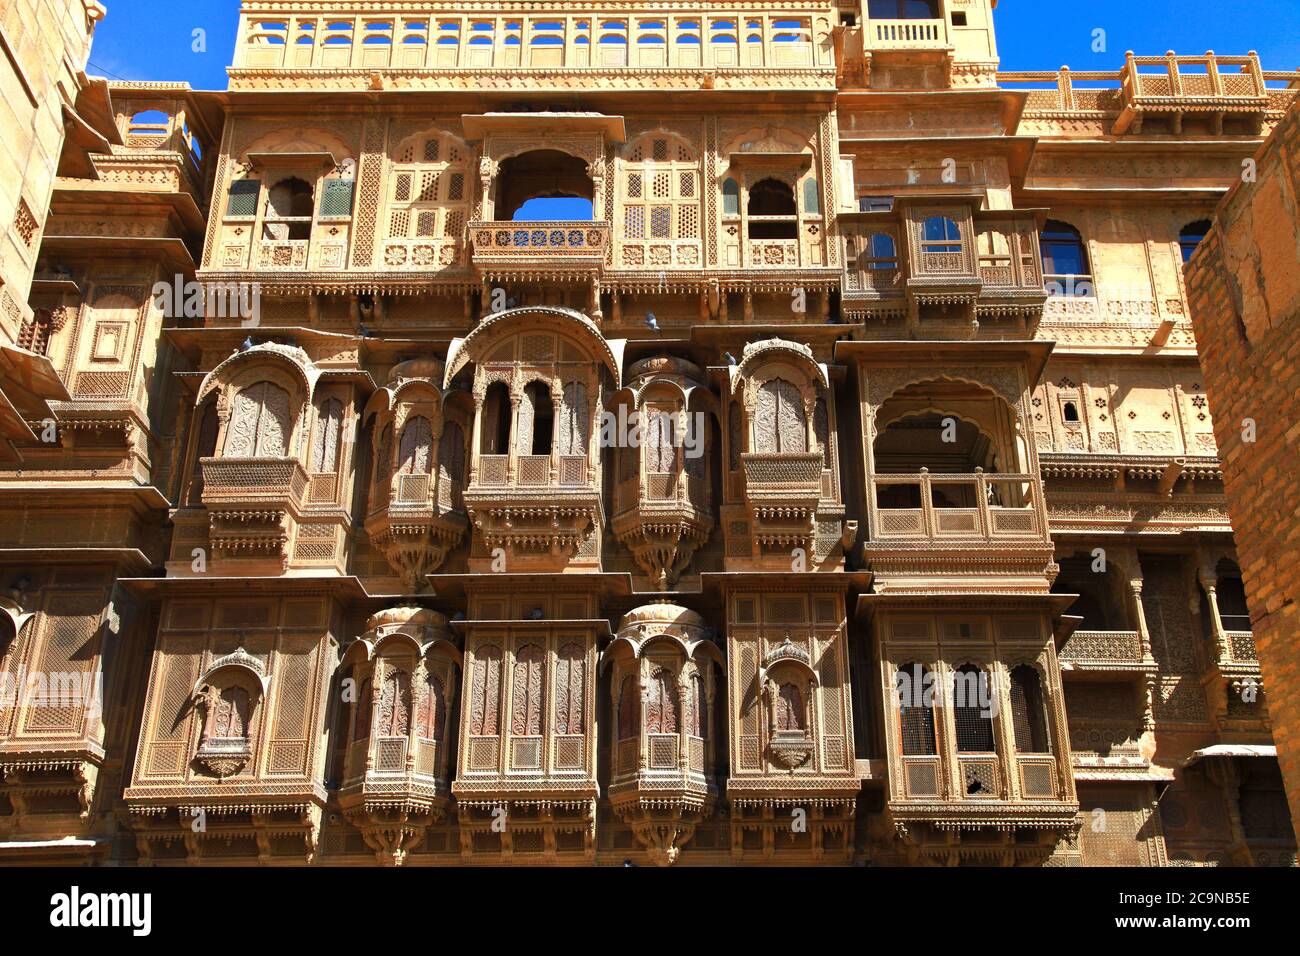 Golden city of India - wonderful Jaisalmer with carved traditional buildings Stock Photo